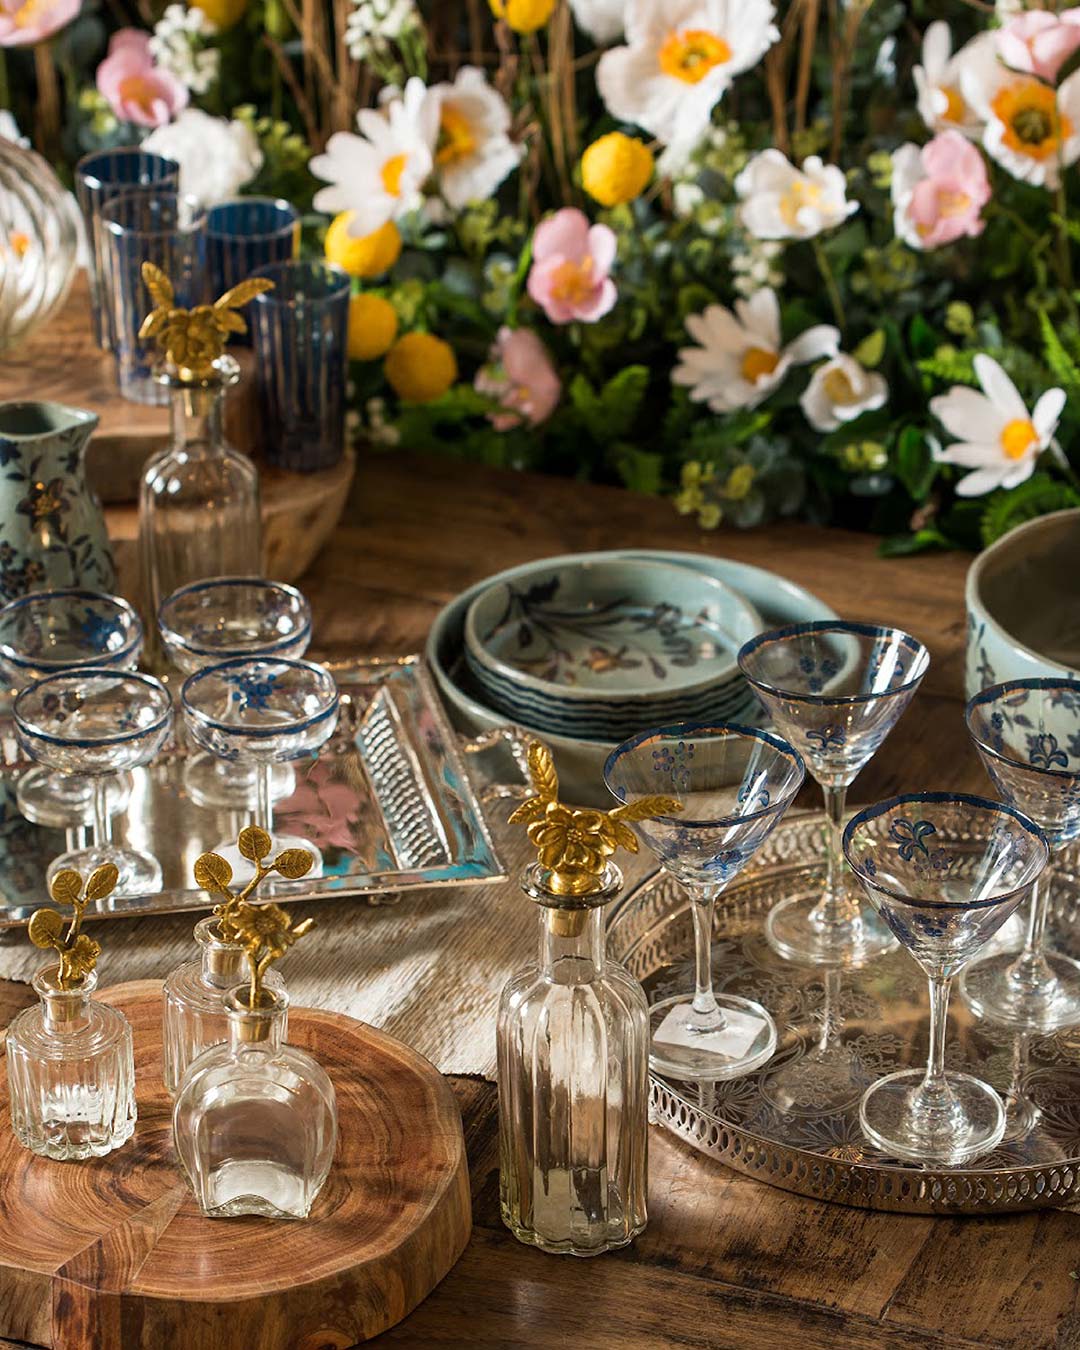 Glasses, bowls and other tableware arranged on a wooden table in front of flowers at Good Earth boutique in Mumbai.